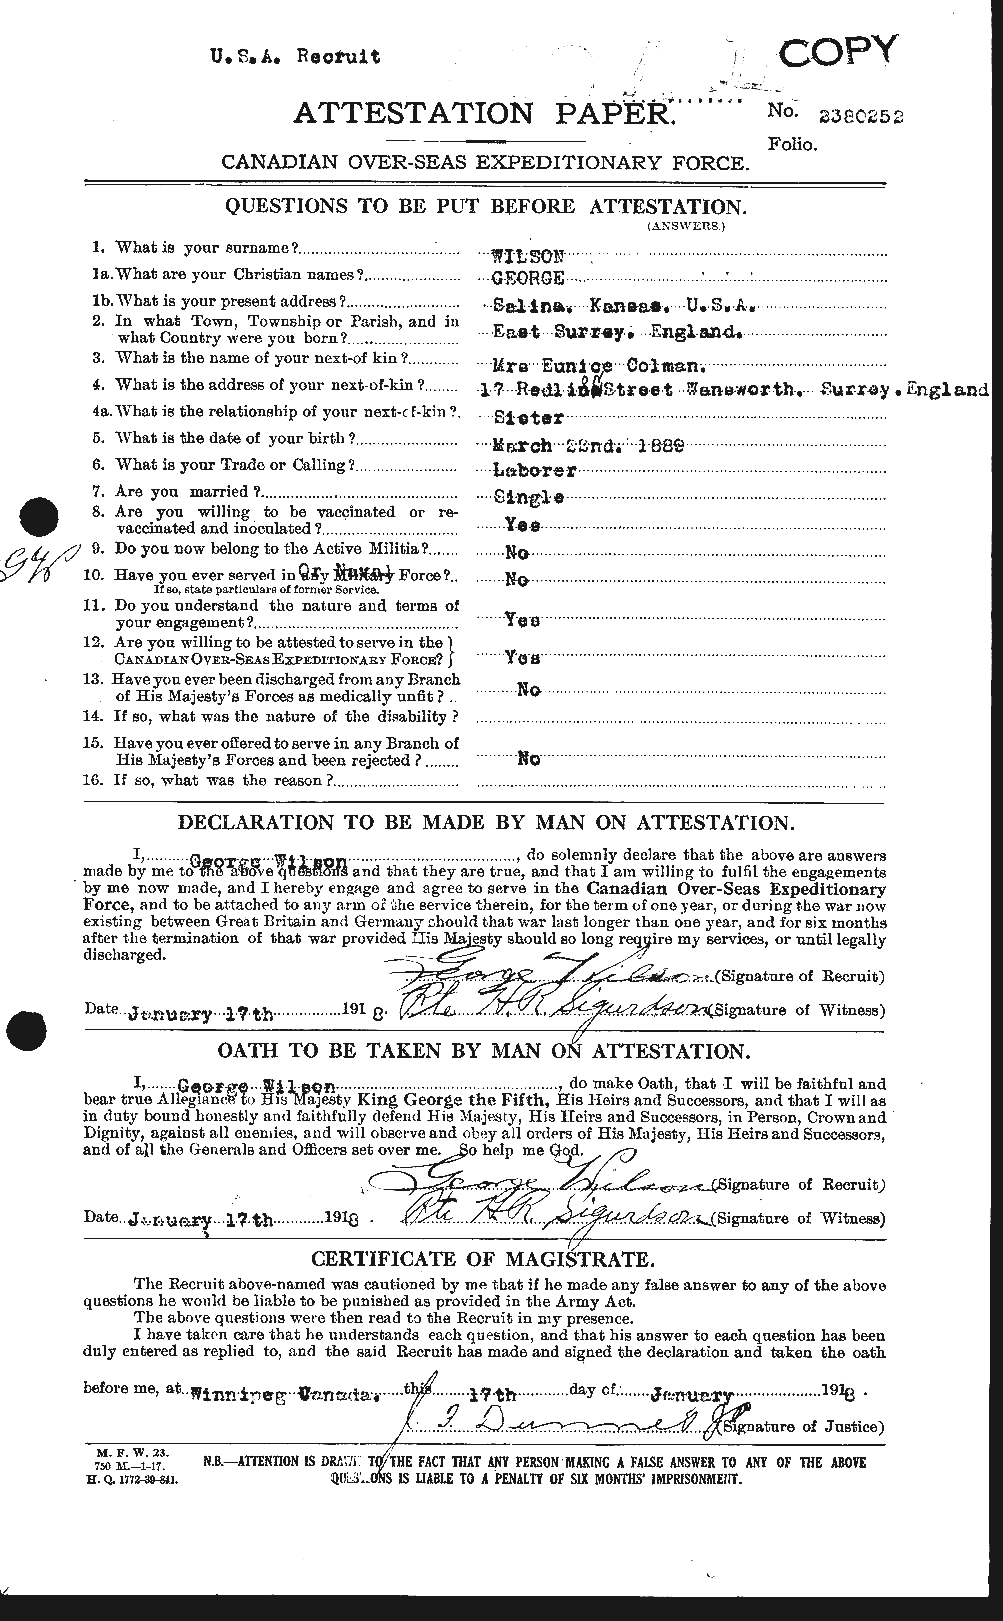 Personnel Records of the First World War - CEF 677652a